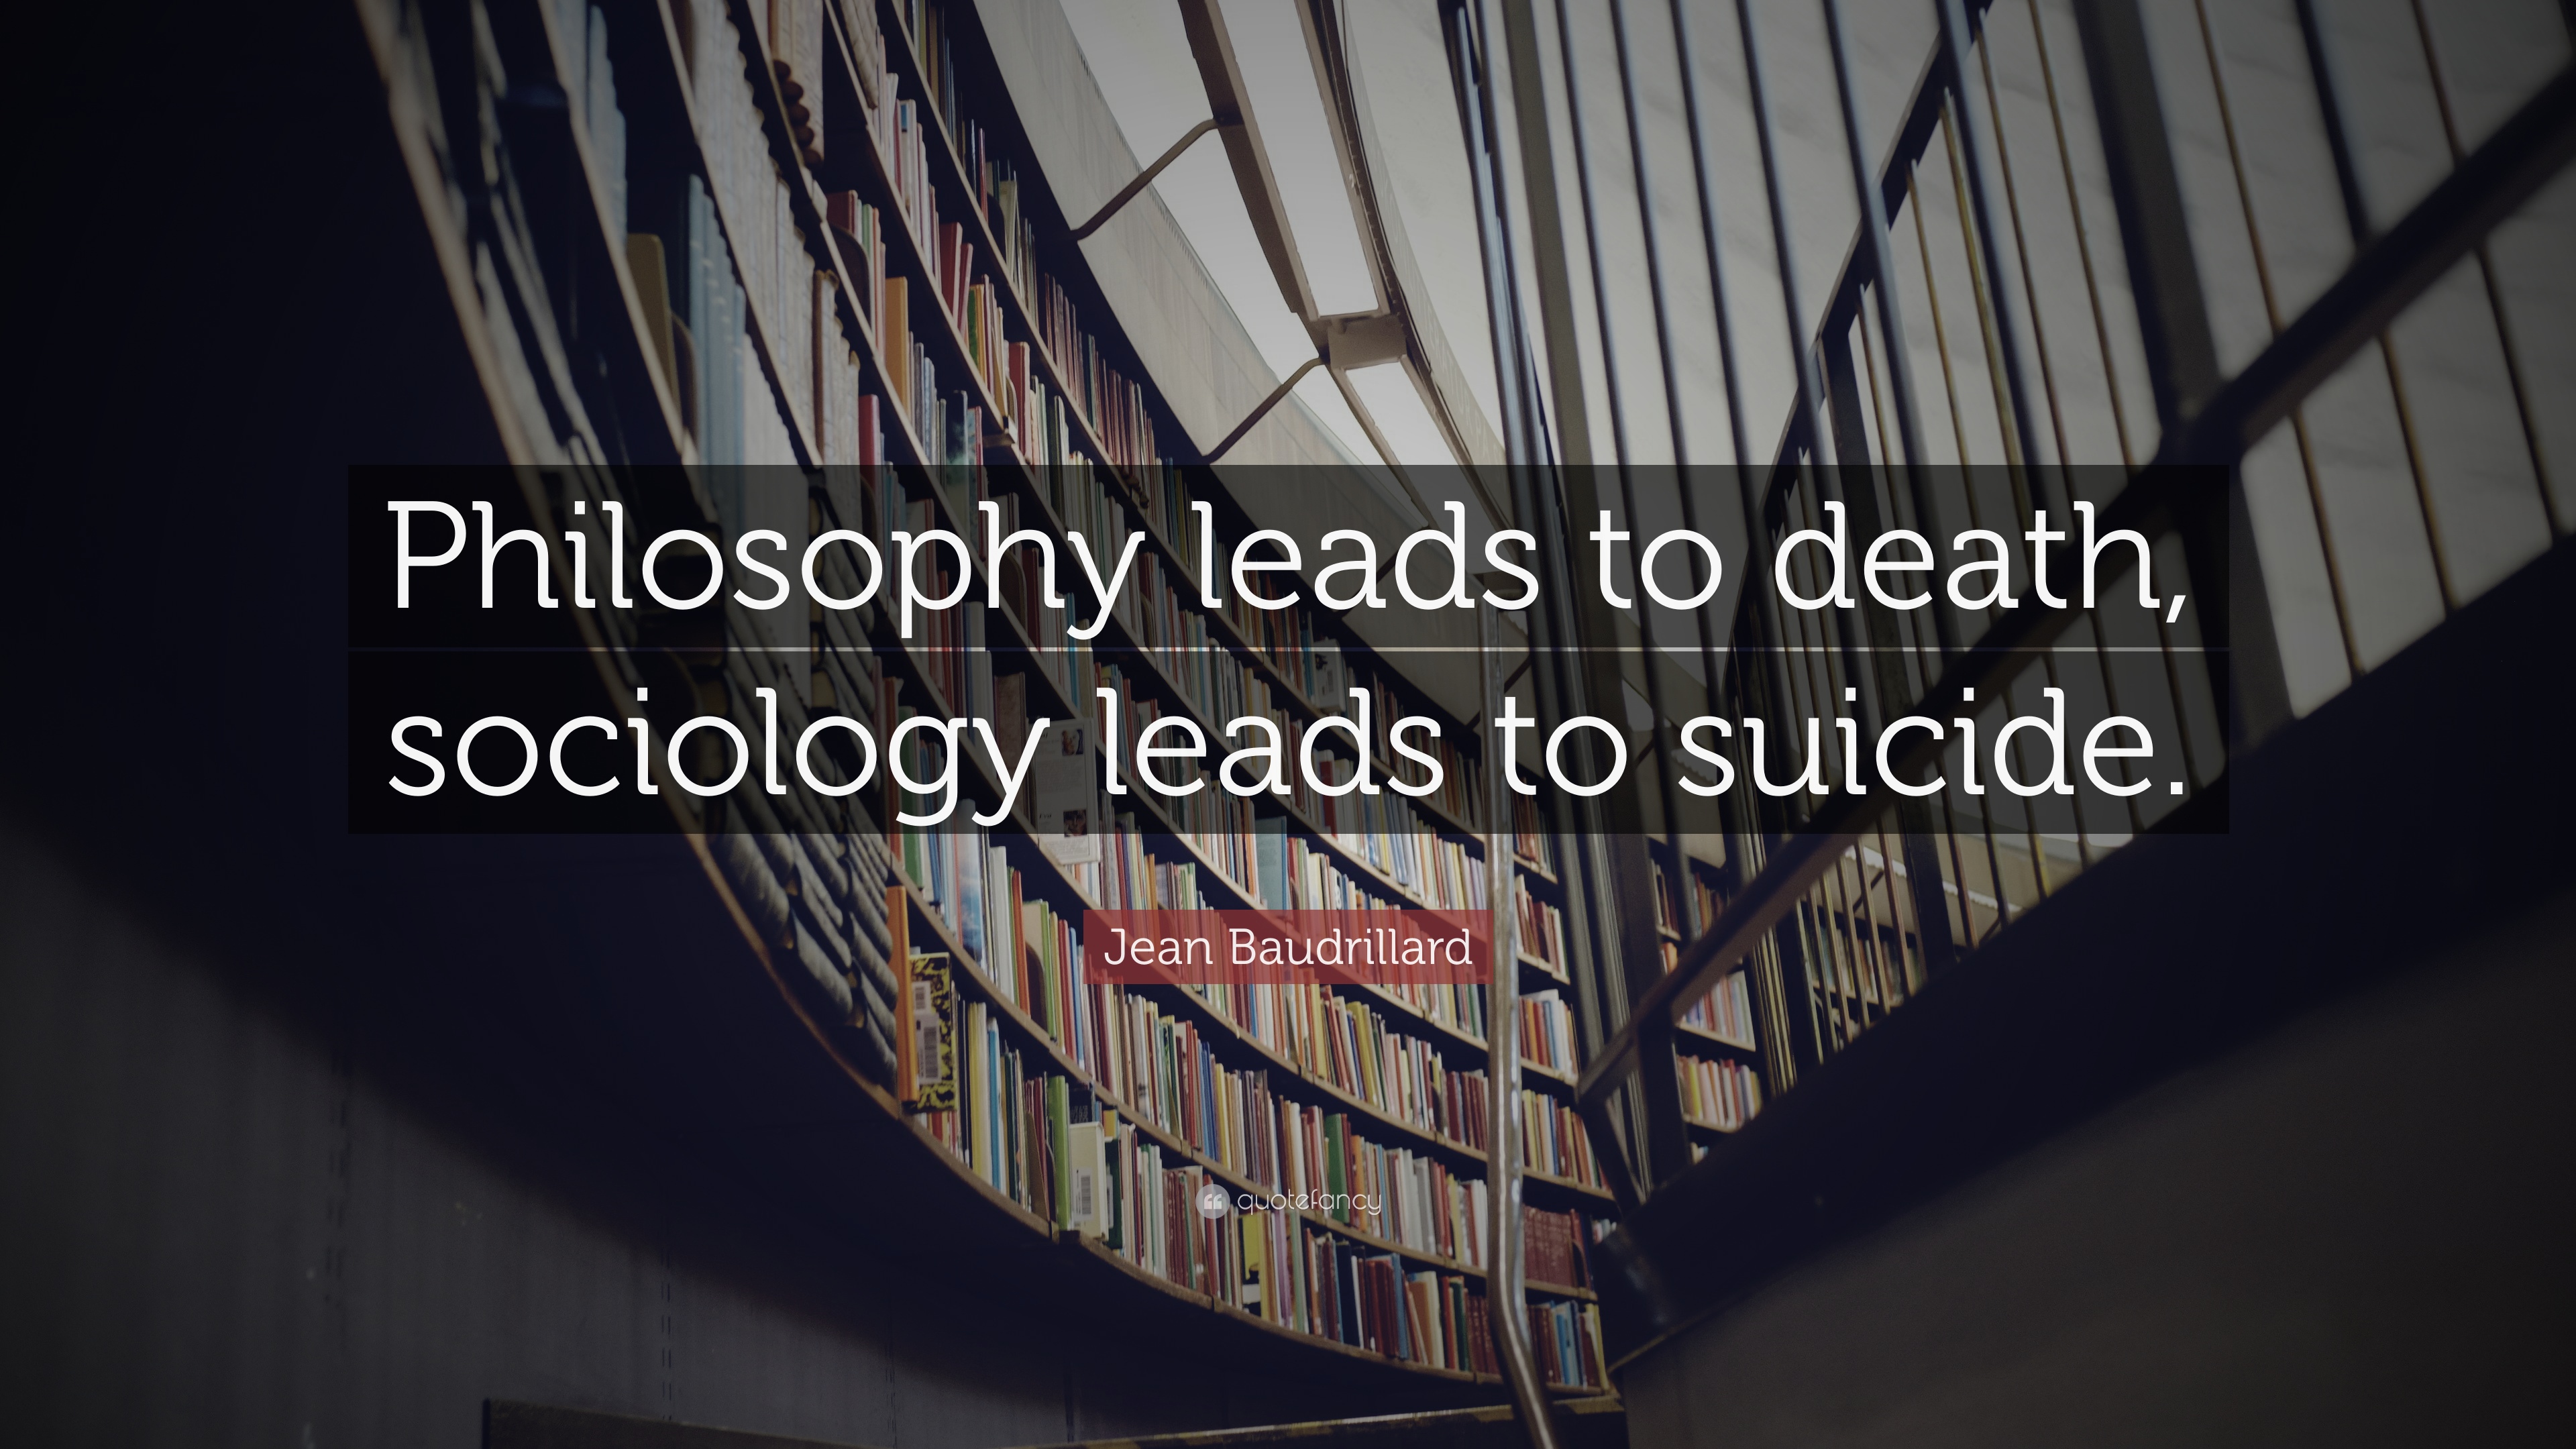 Jean baudrillard quote âphilosophy leads to death sociology leads to suicideâ